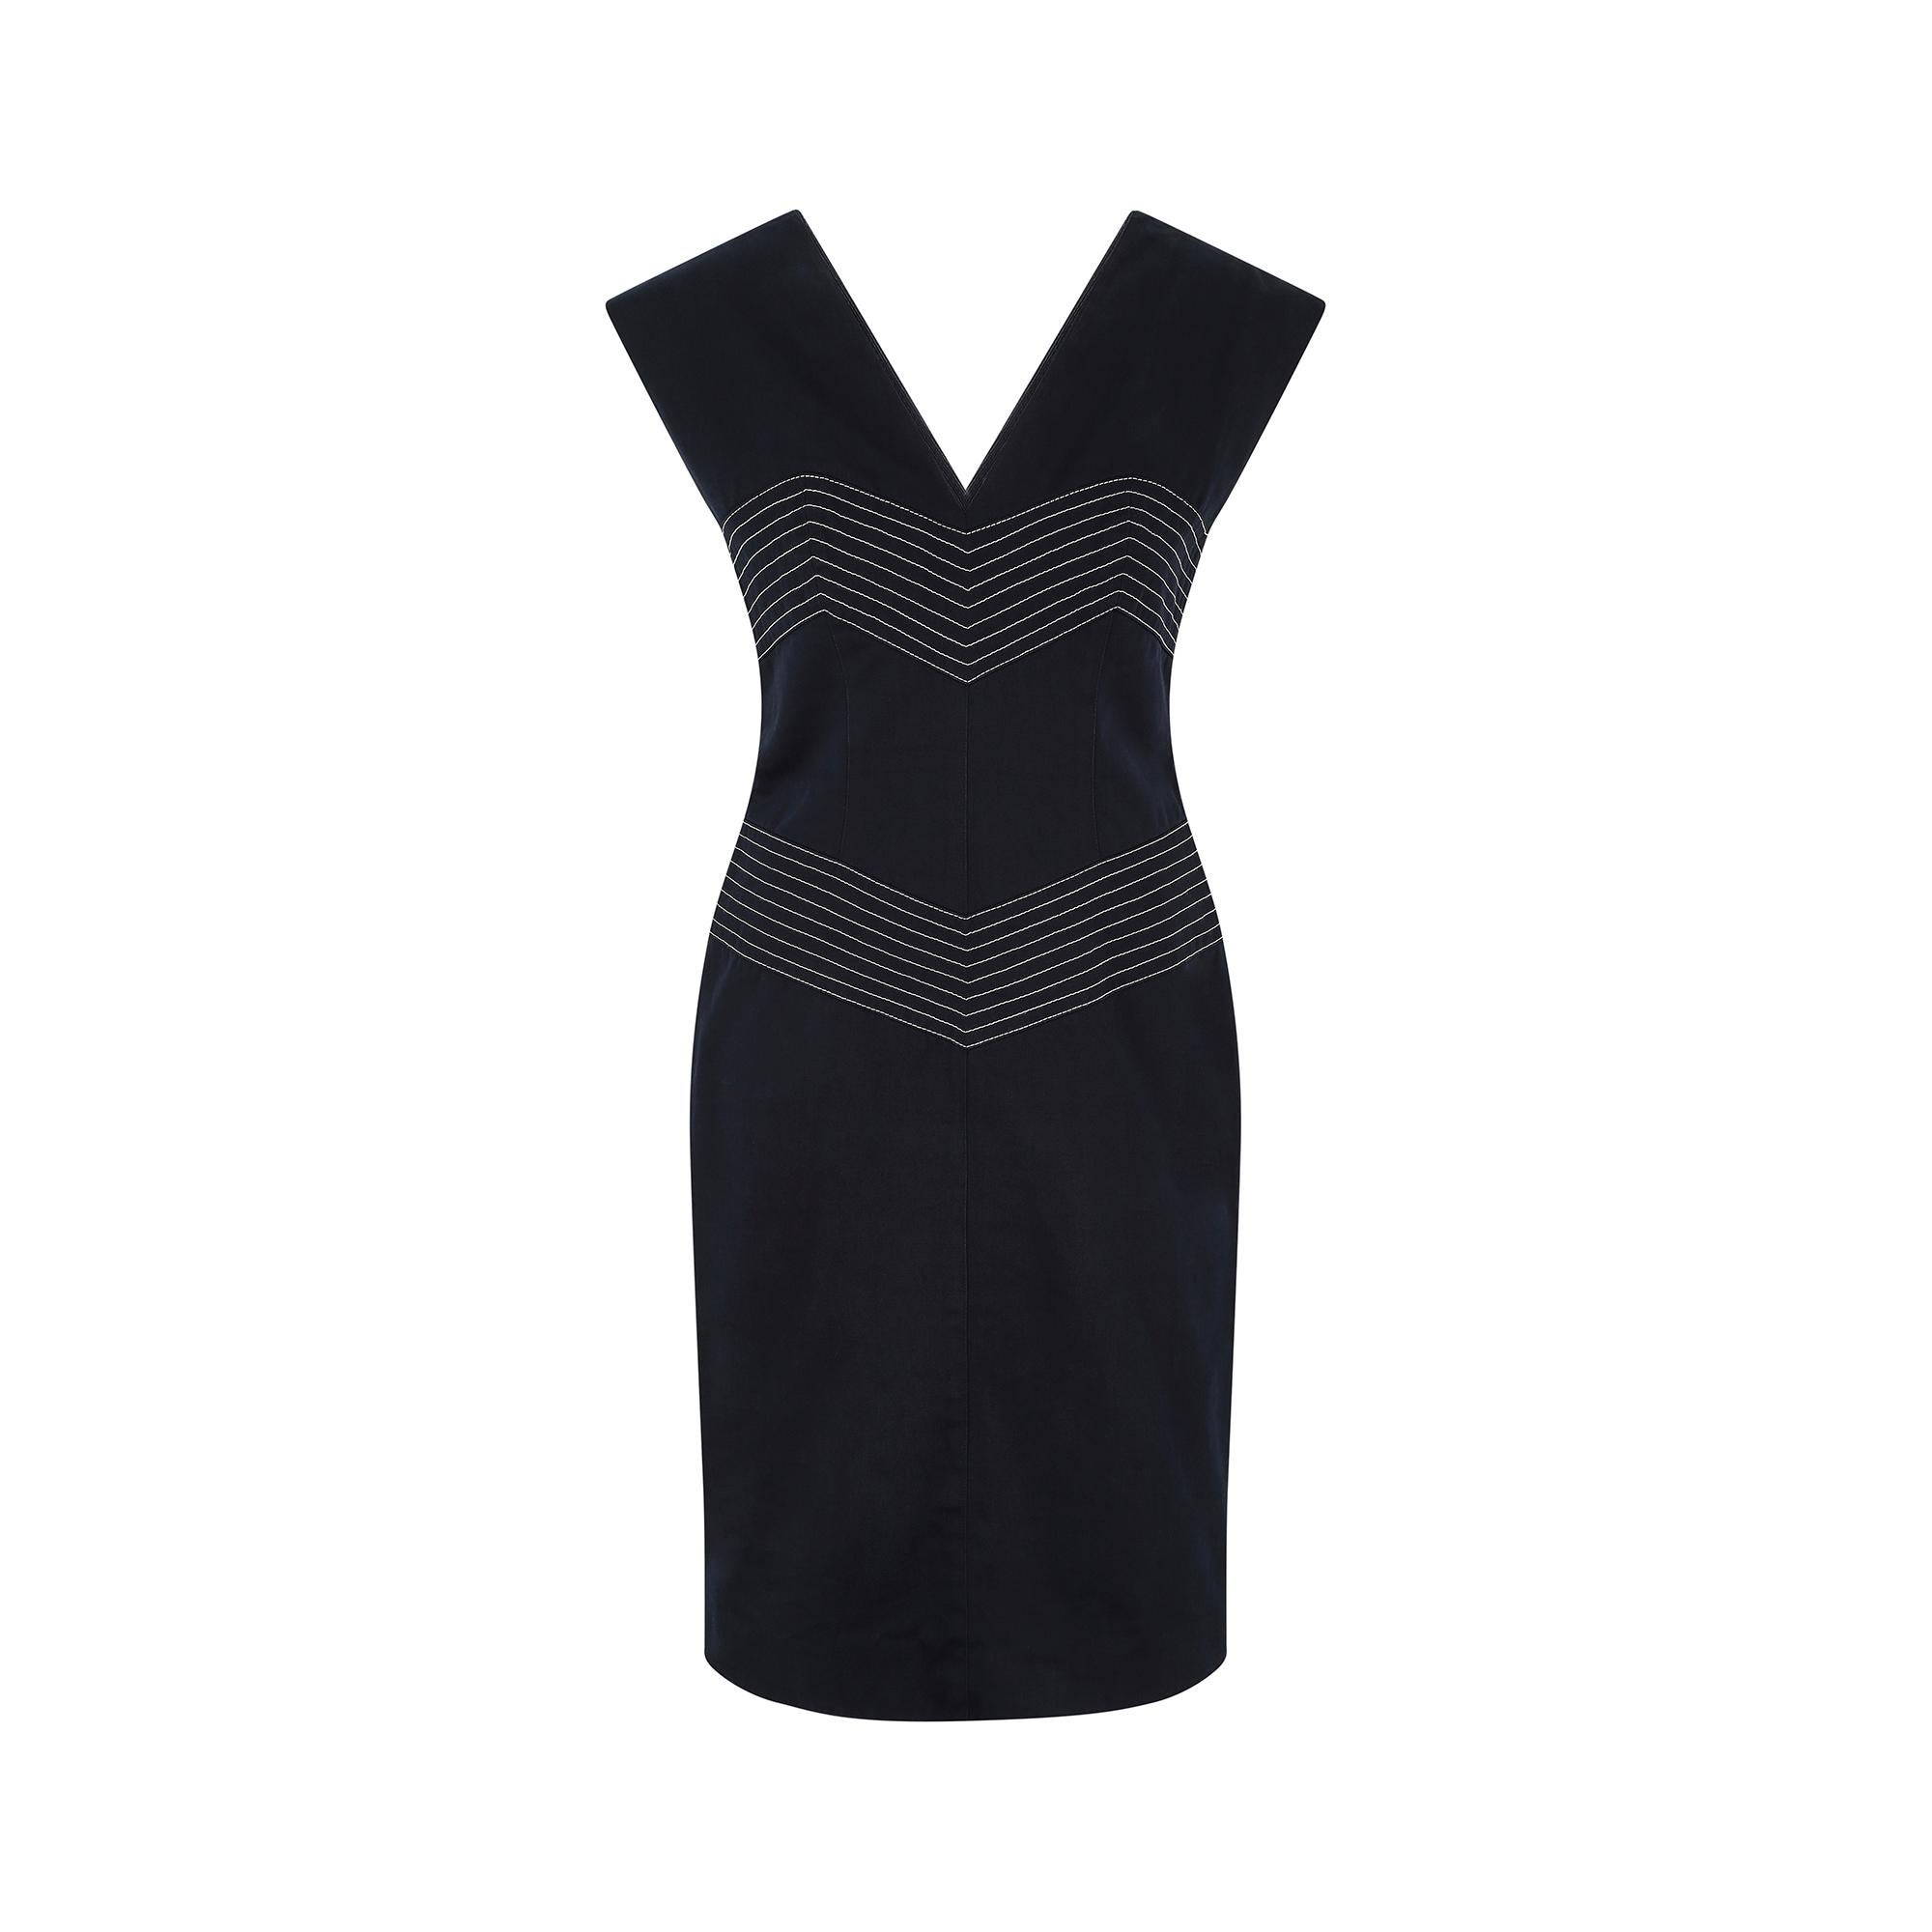 This form-fitting, Y2K sleeveless dress was made in France by Thierry Mugler circa 2000-2001 and is from his high-end couture line. The master of hyper-feminine tailoring, Mugler designed it to echo the curves of the body. It is tailored from